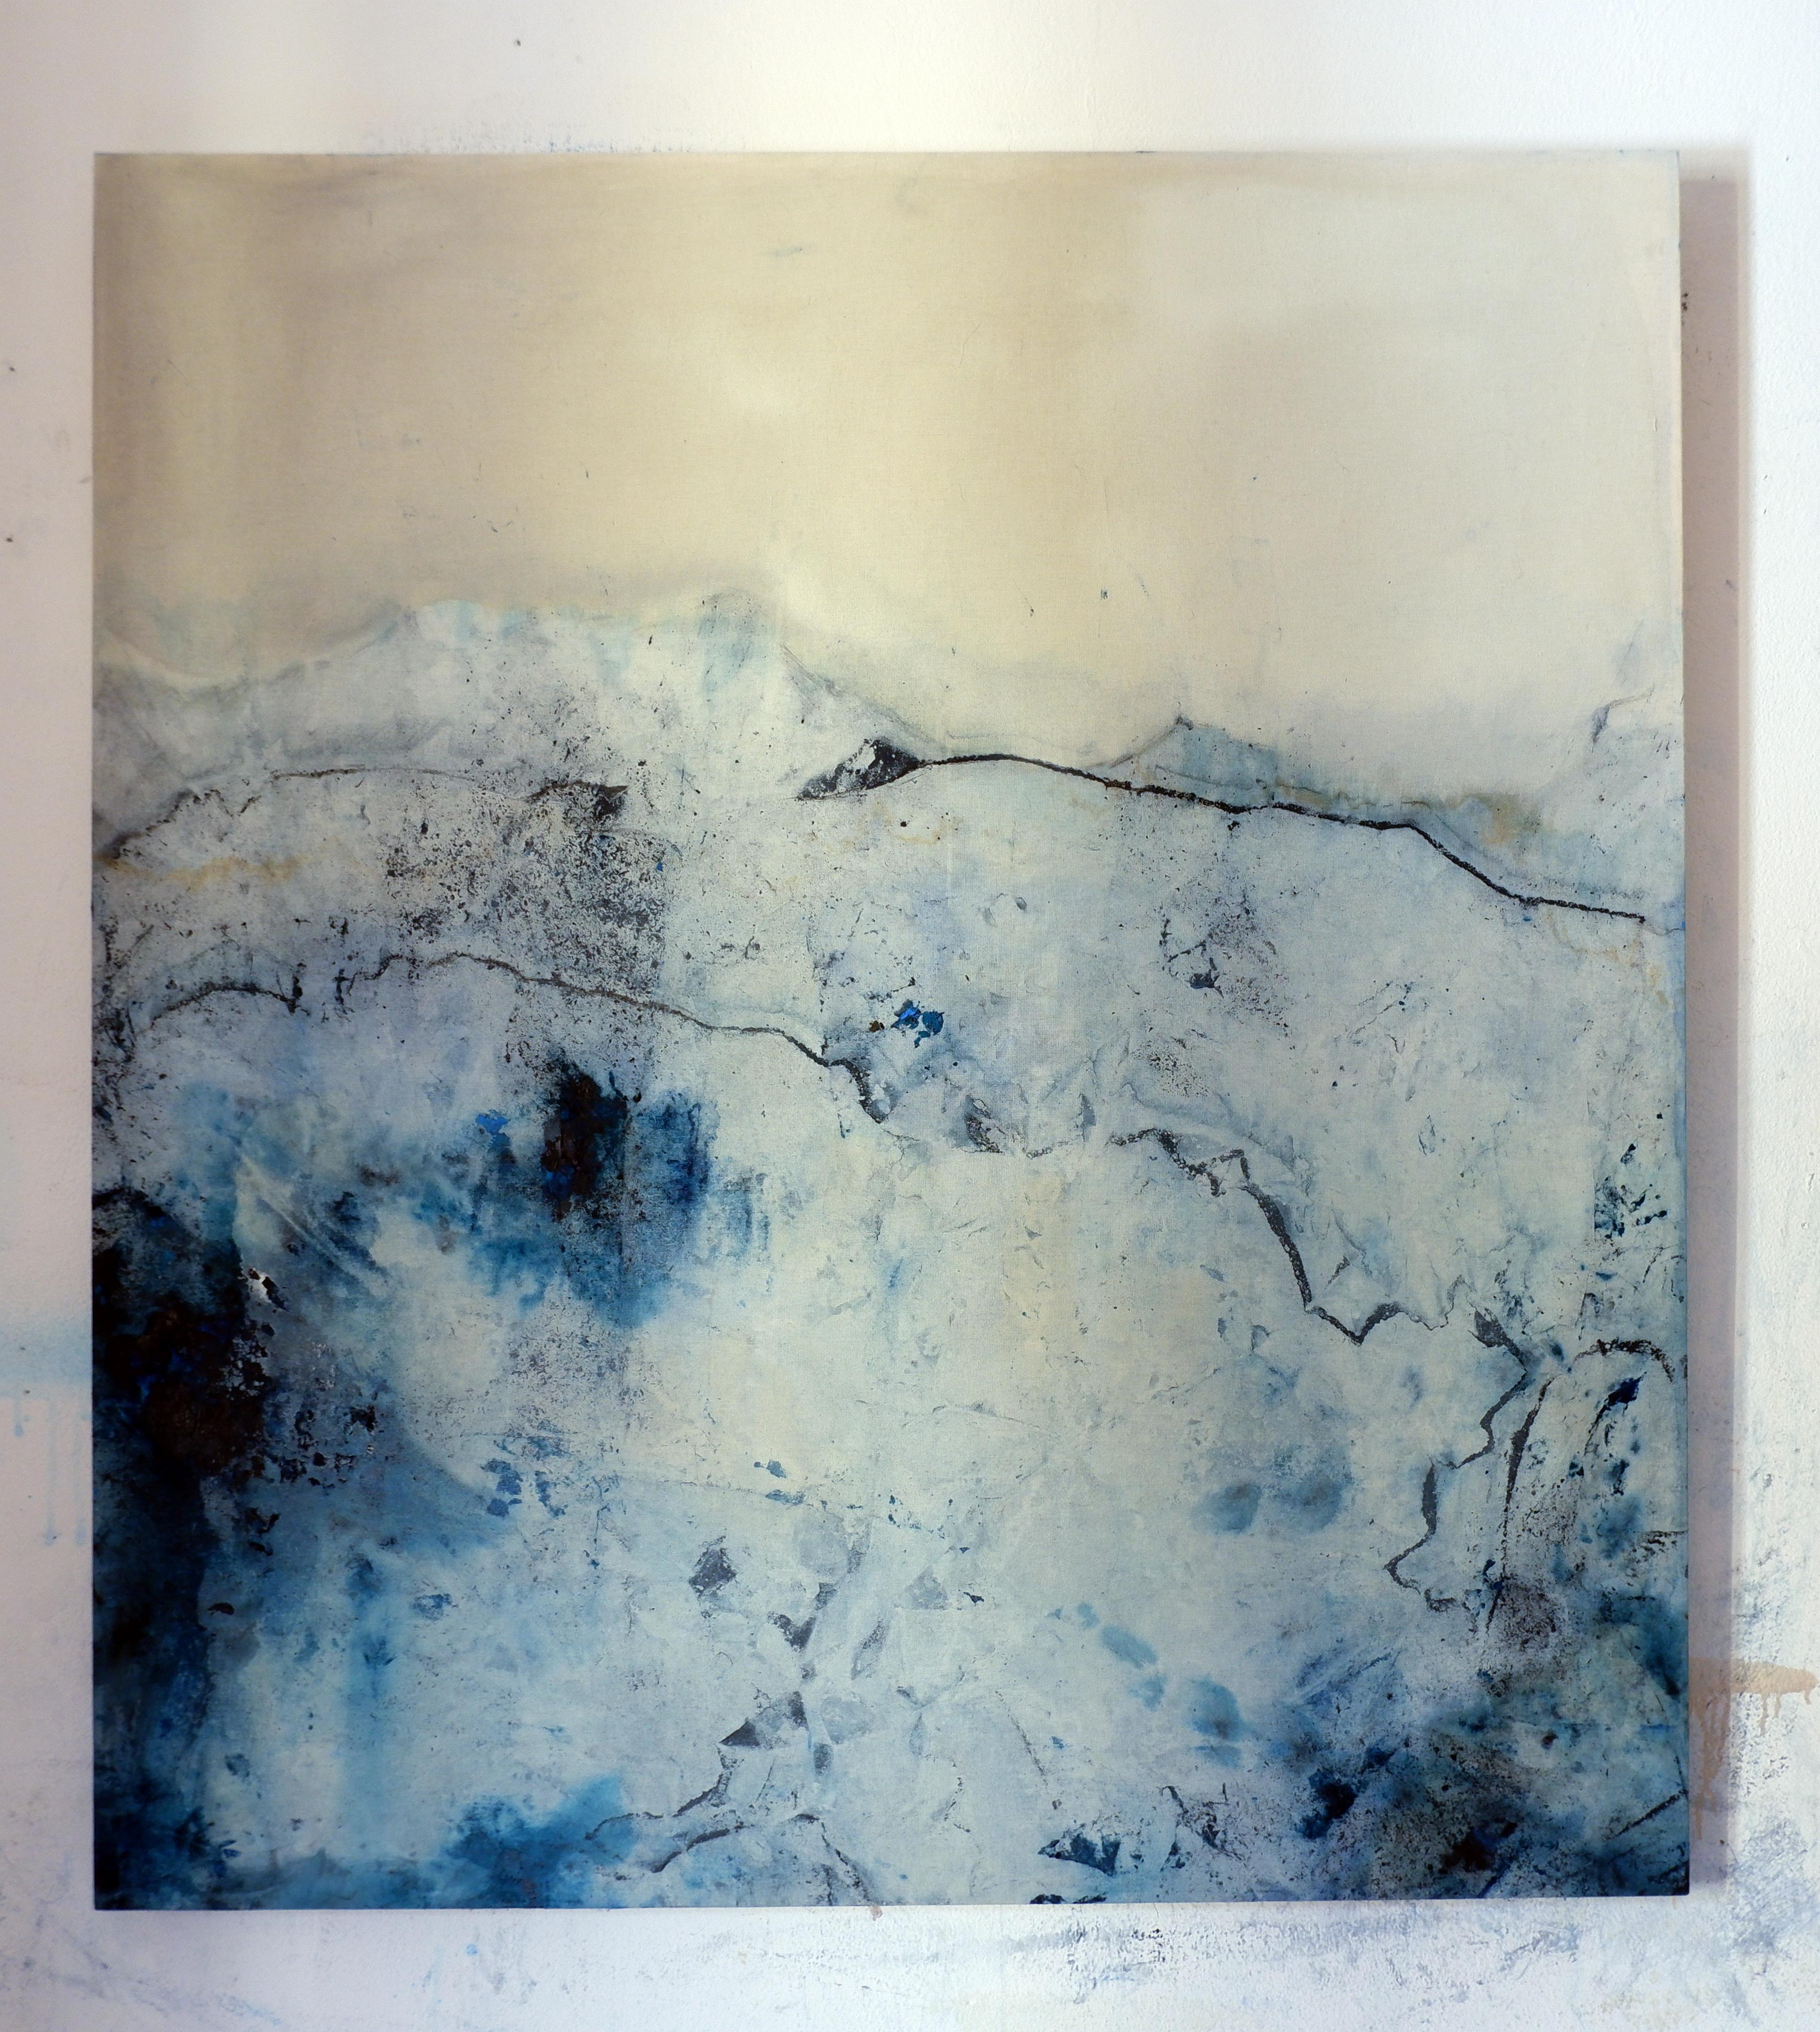 'Landscape 90' is an original minimalist abstract art on canvas by emerging Sicilian artist - Marilina Marchica. It is a delicate mixed media painting on cotton canvas. The subject is focused on Italian nature, sea views, decaying buildings, and